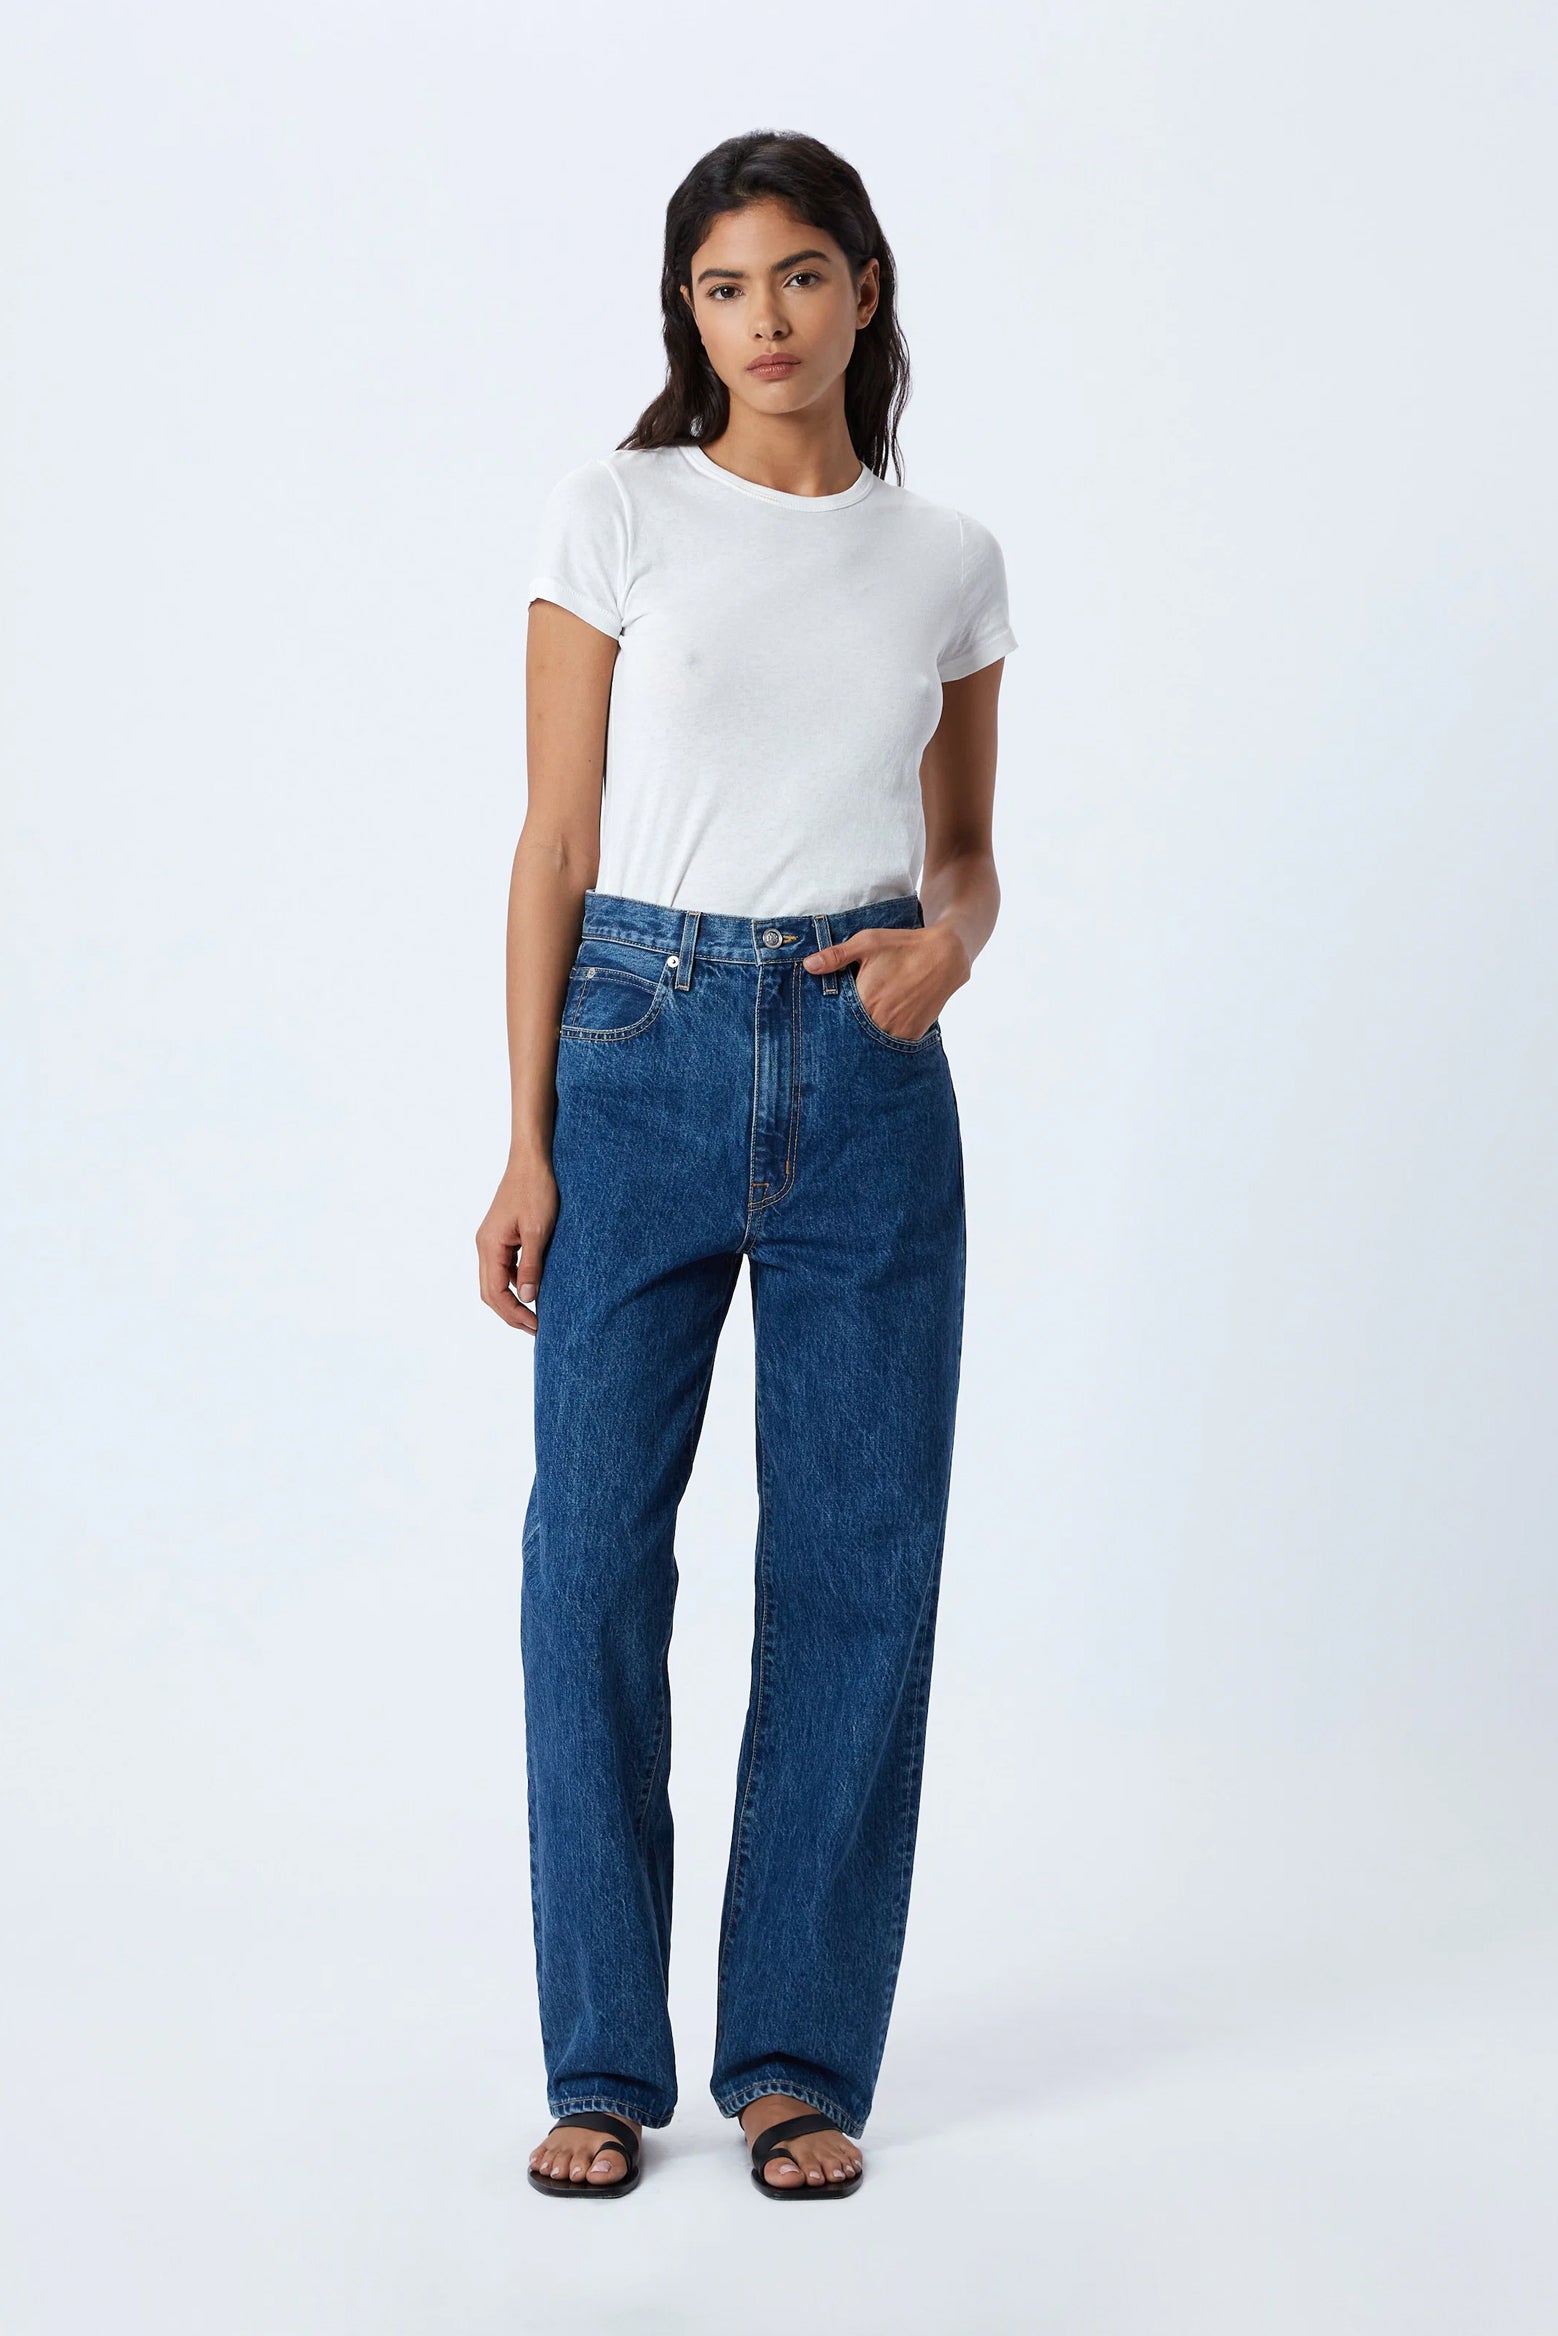 The SLVRLake Koko High Rise Relaxed Jean in Claremont available at The New Trend Australia